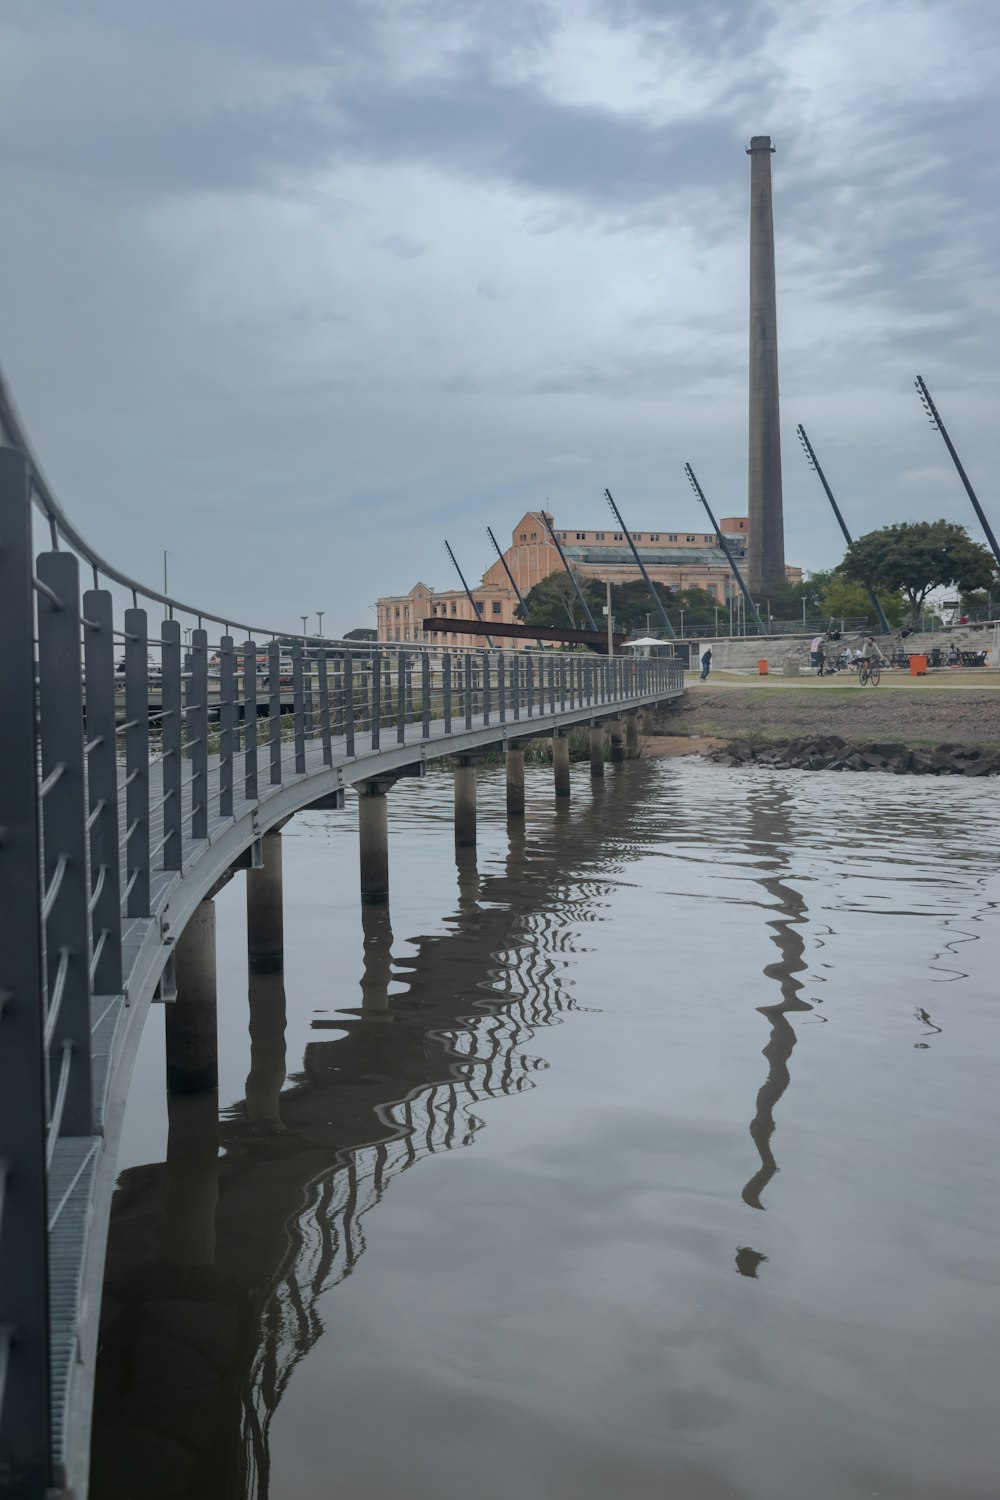 a bridge over a body of water with a factory in the background